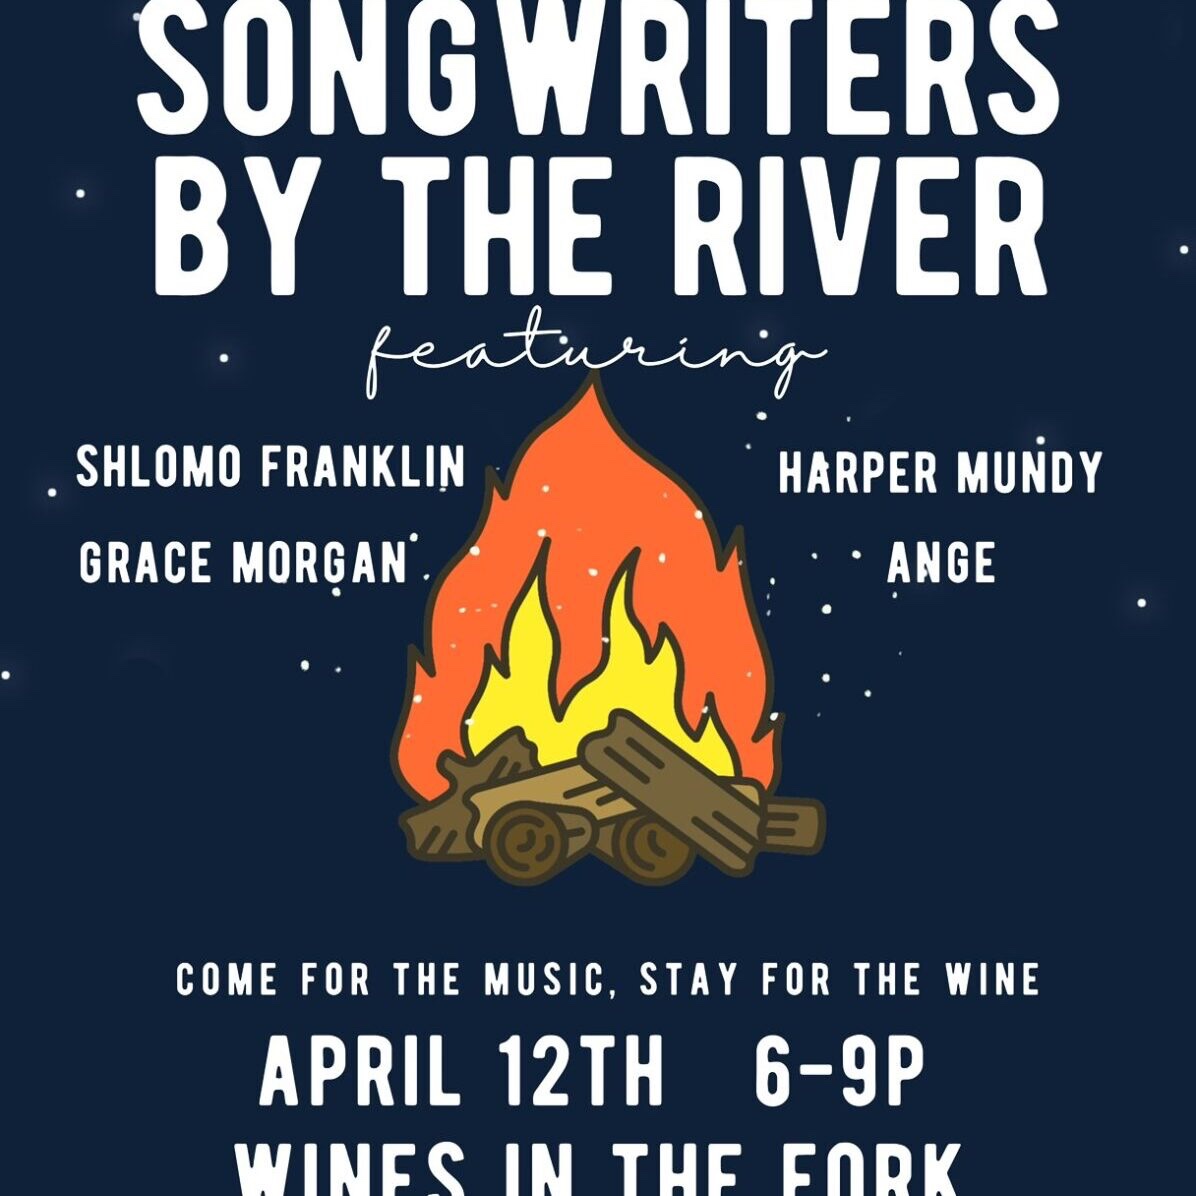 Songwriters By The River Franklin TN